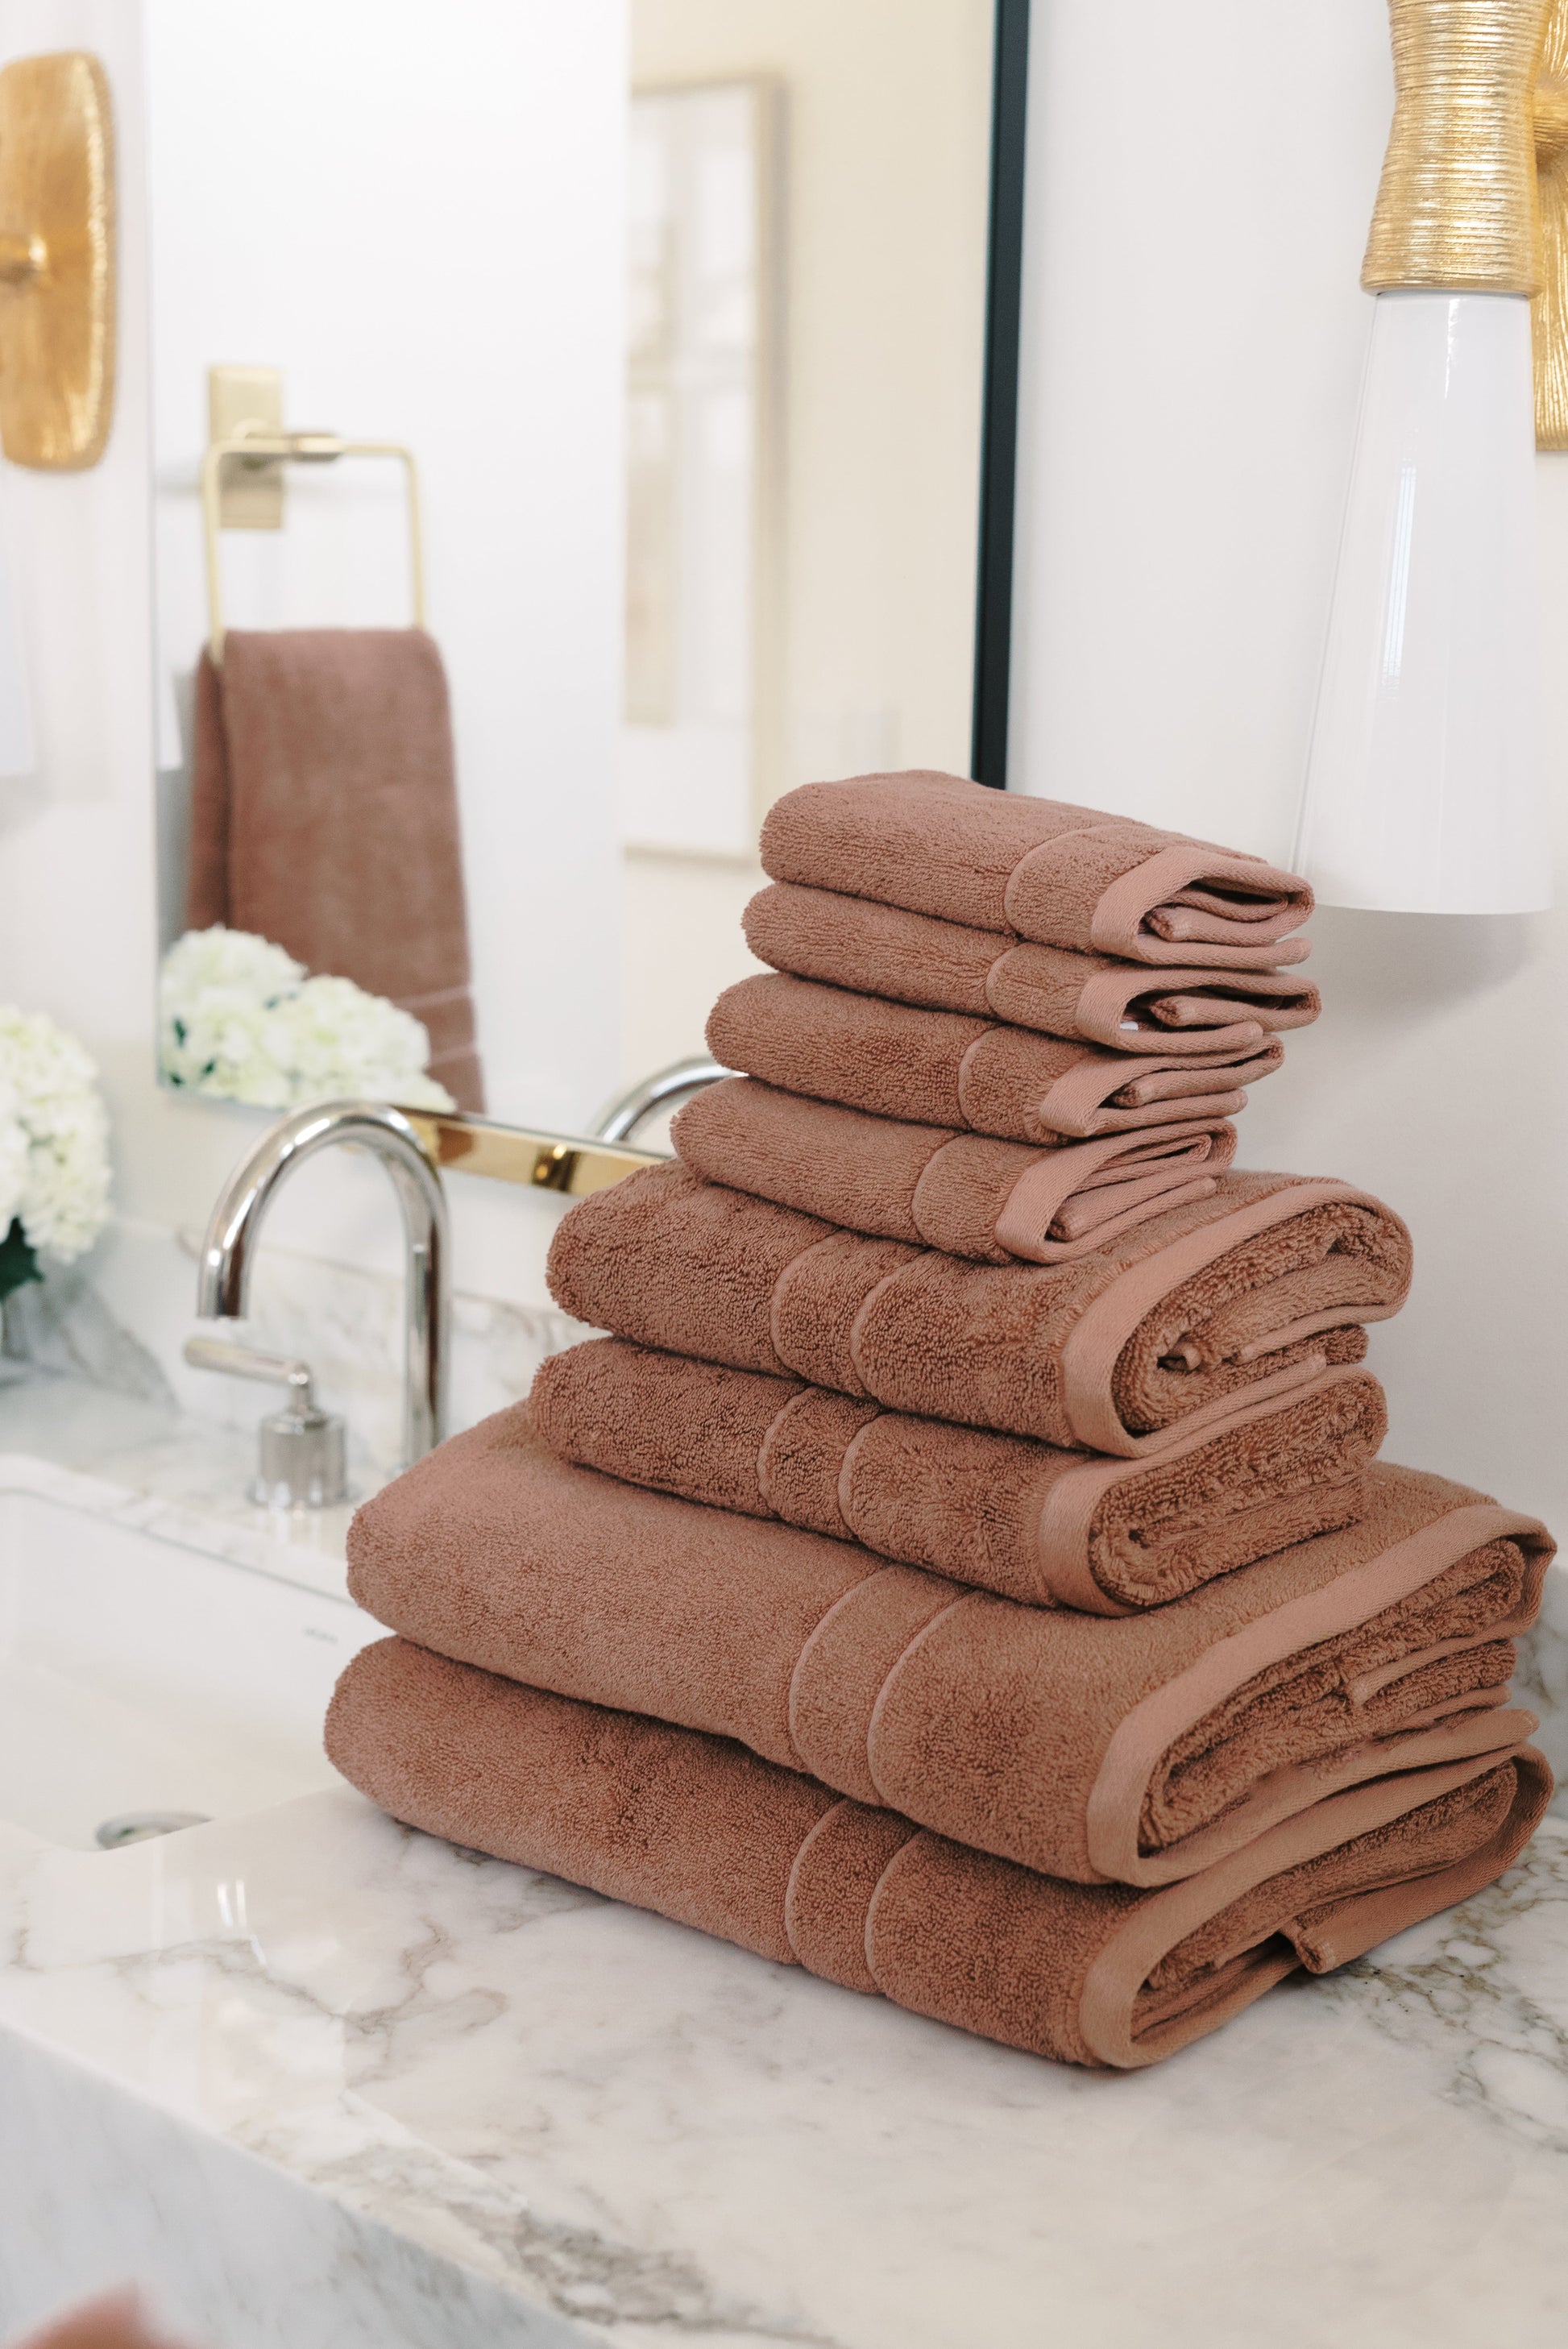 Premium Plush Bath Towel Set in the color Clay. Photo of Clay Premium Plush Bath Towel Set taken in a bathroom featuring white backsplash tile |Color:Clay